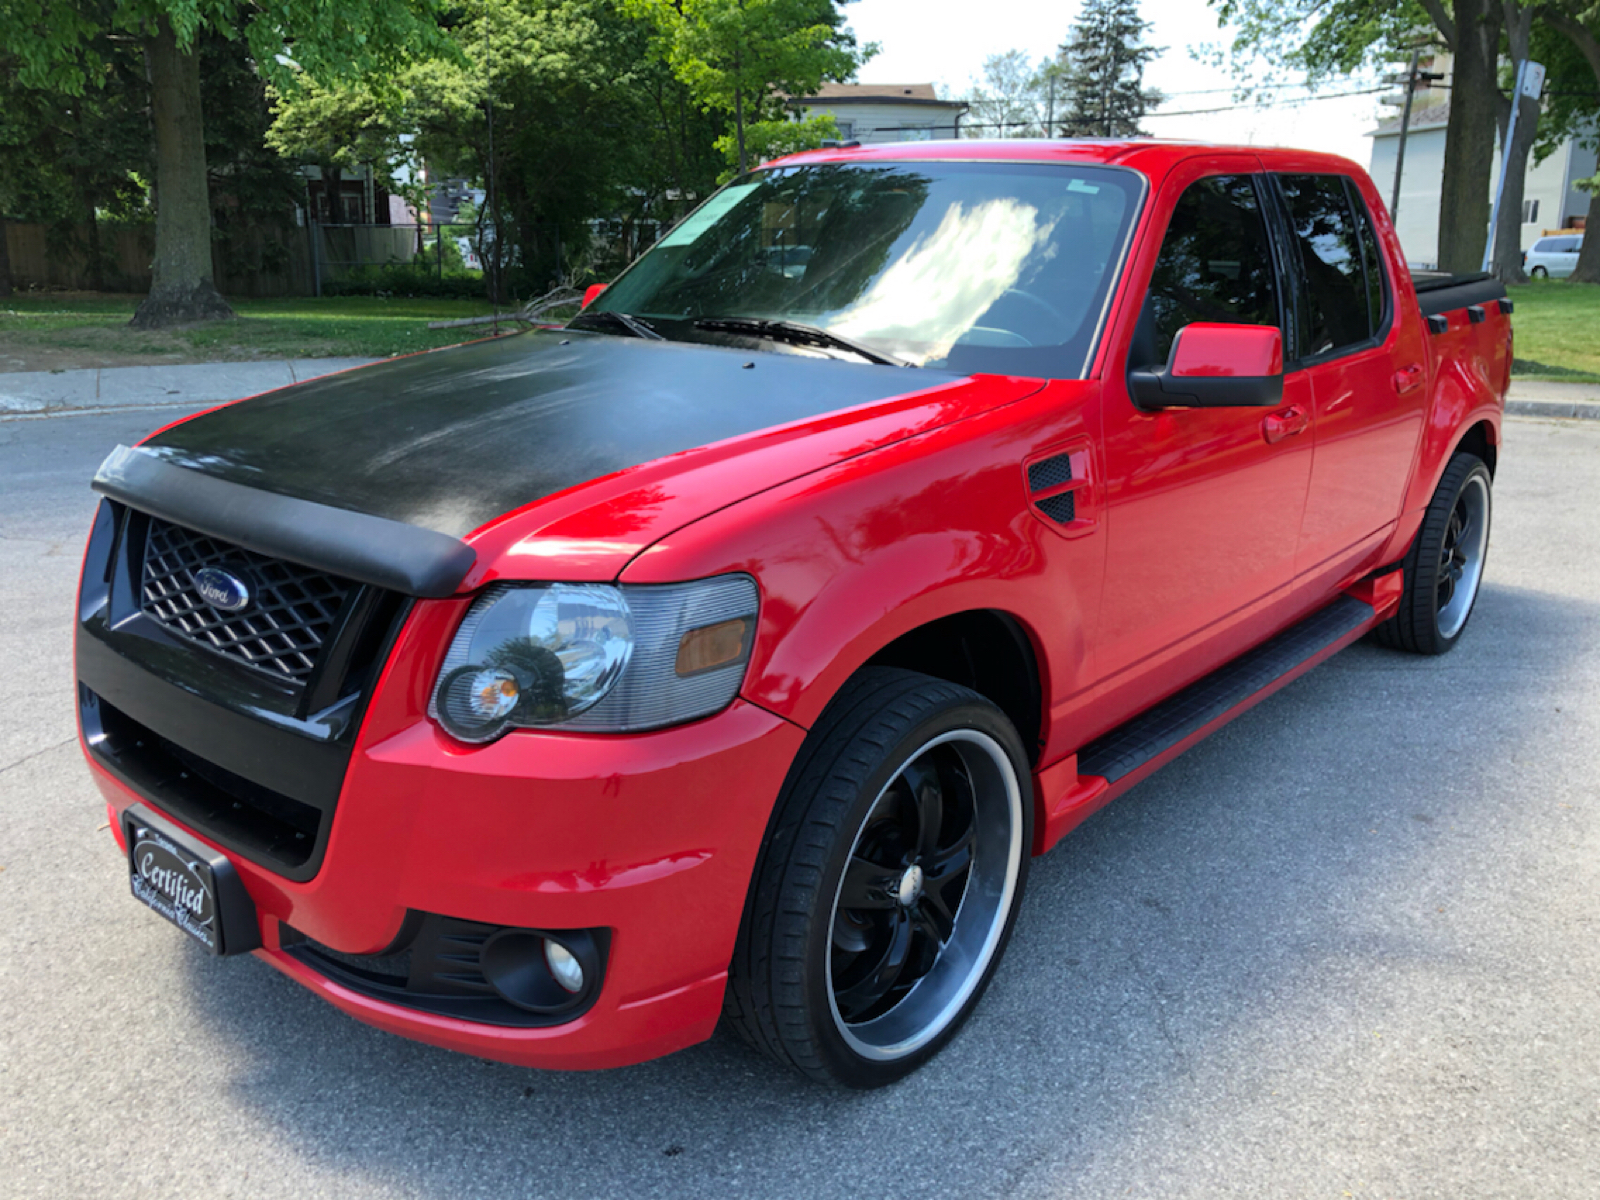 09 Ford Explorer Sport Trac For Sale In Toronto On The Car Guide